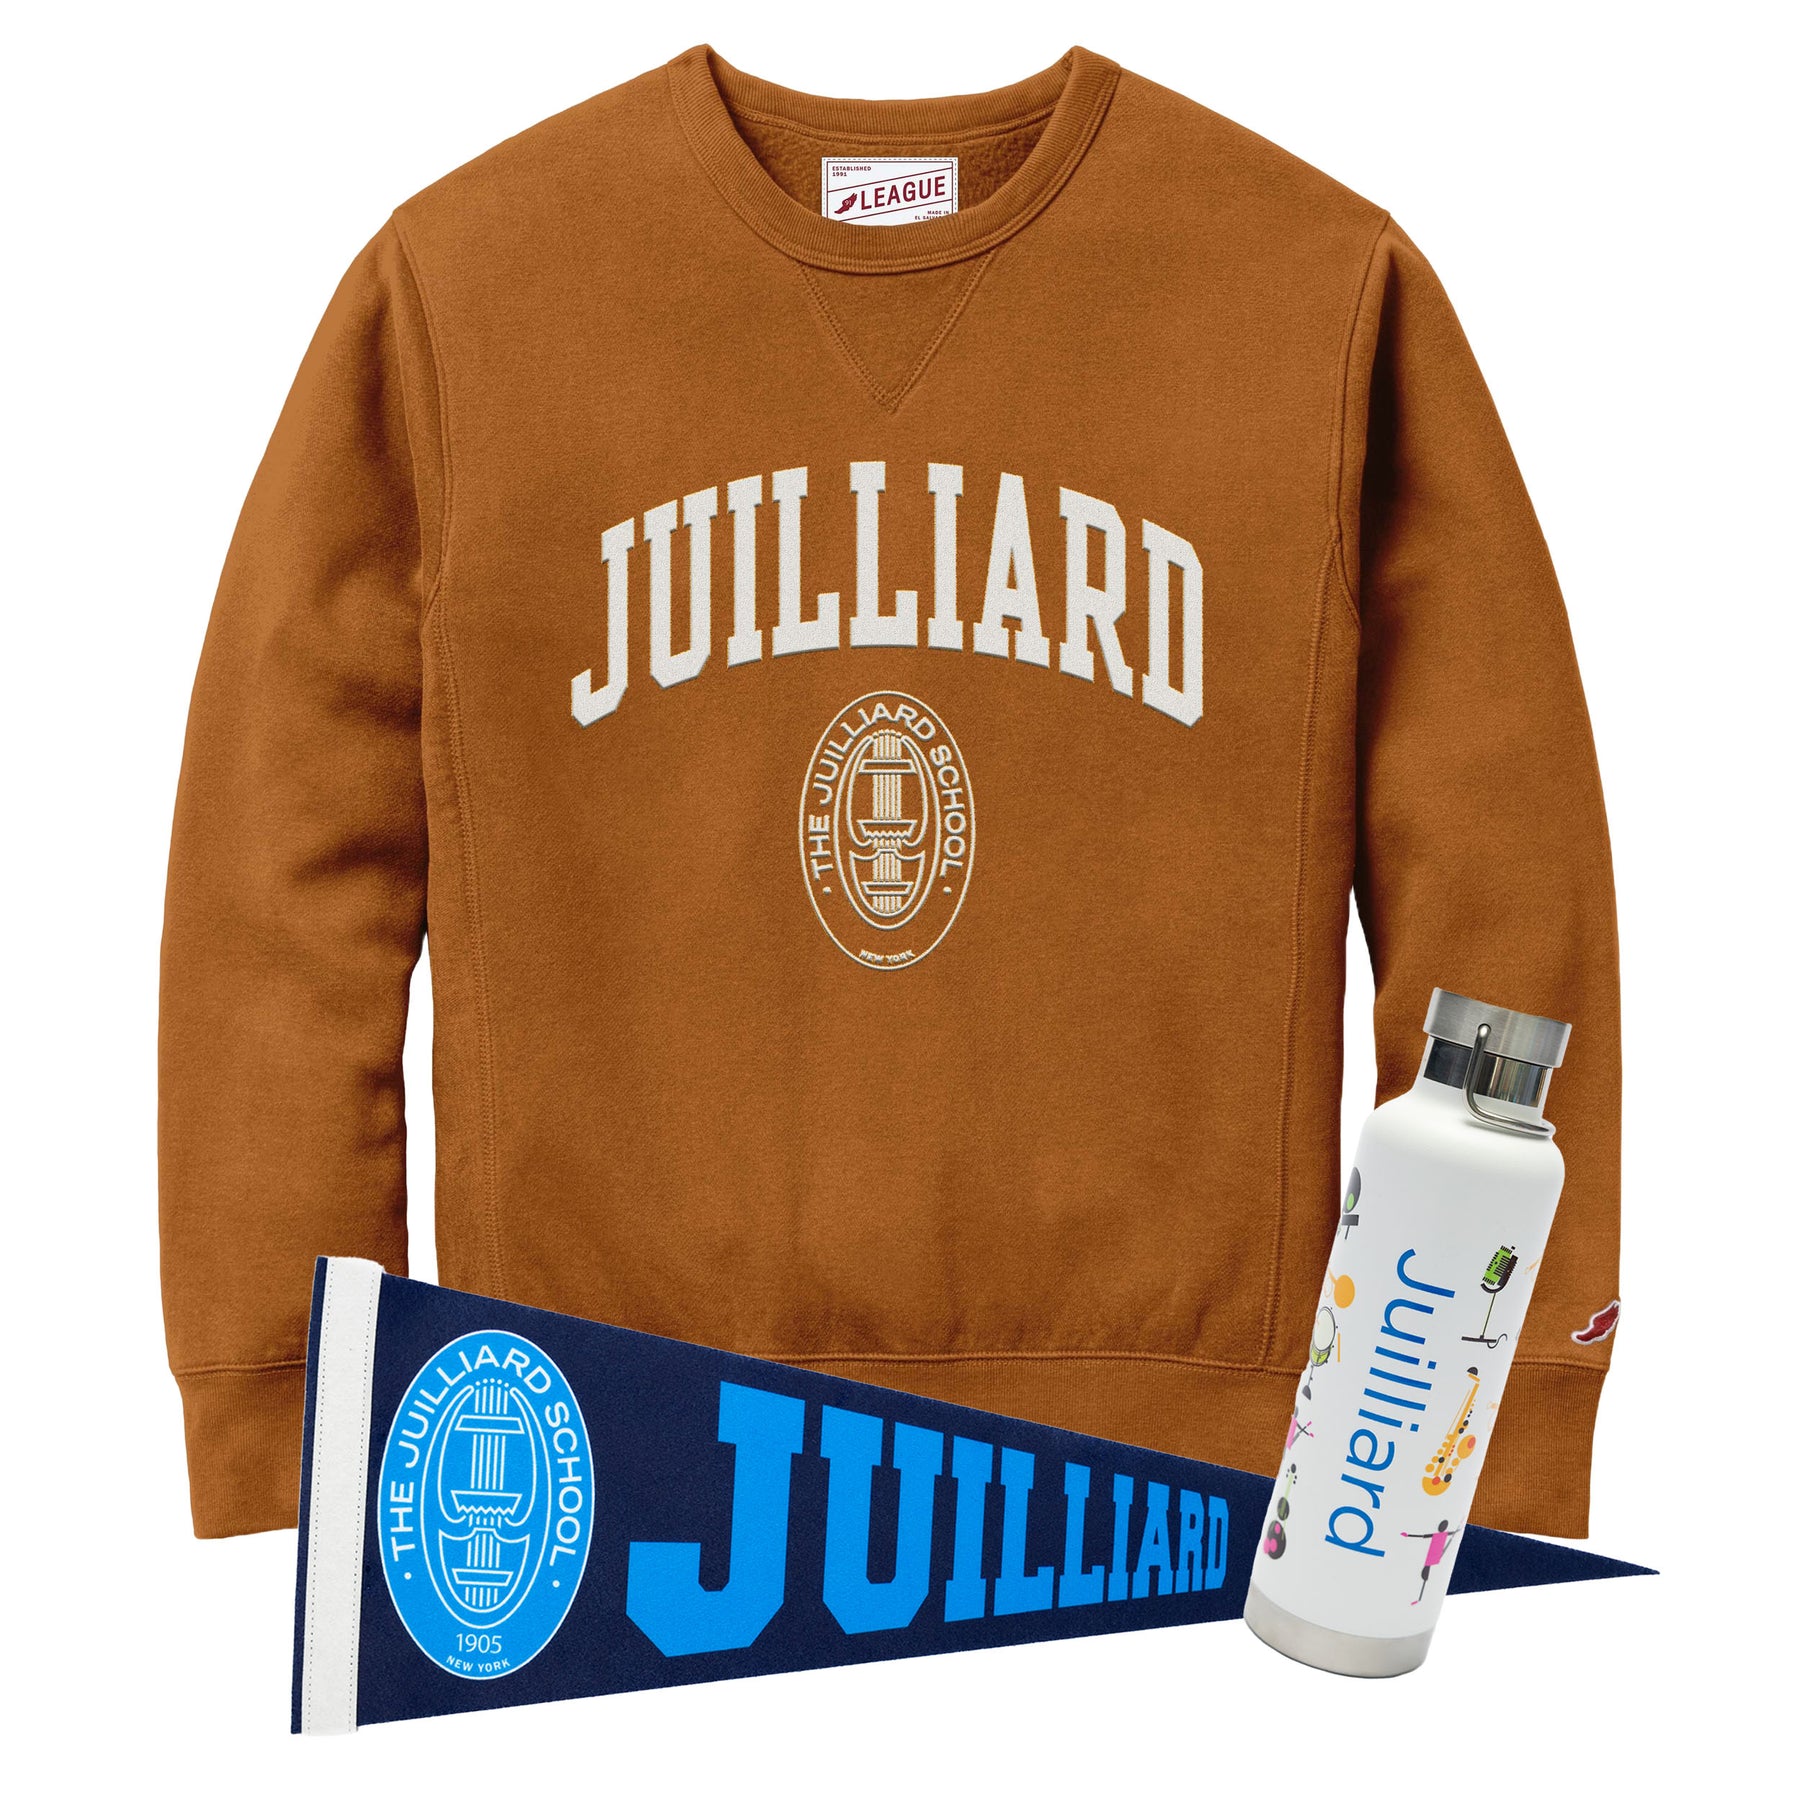 Bundle: Accepted Student Bundle (Collegiate Embroidered Crew)